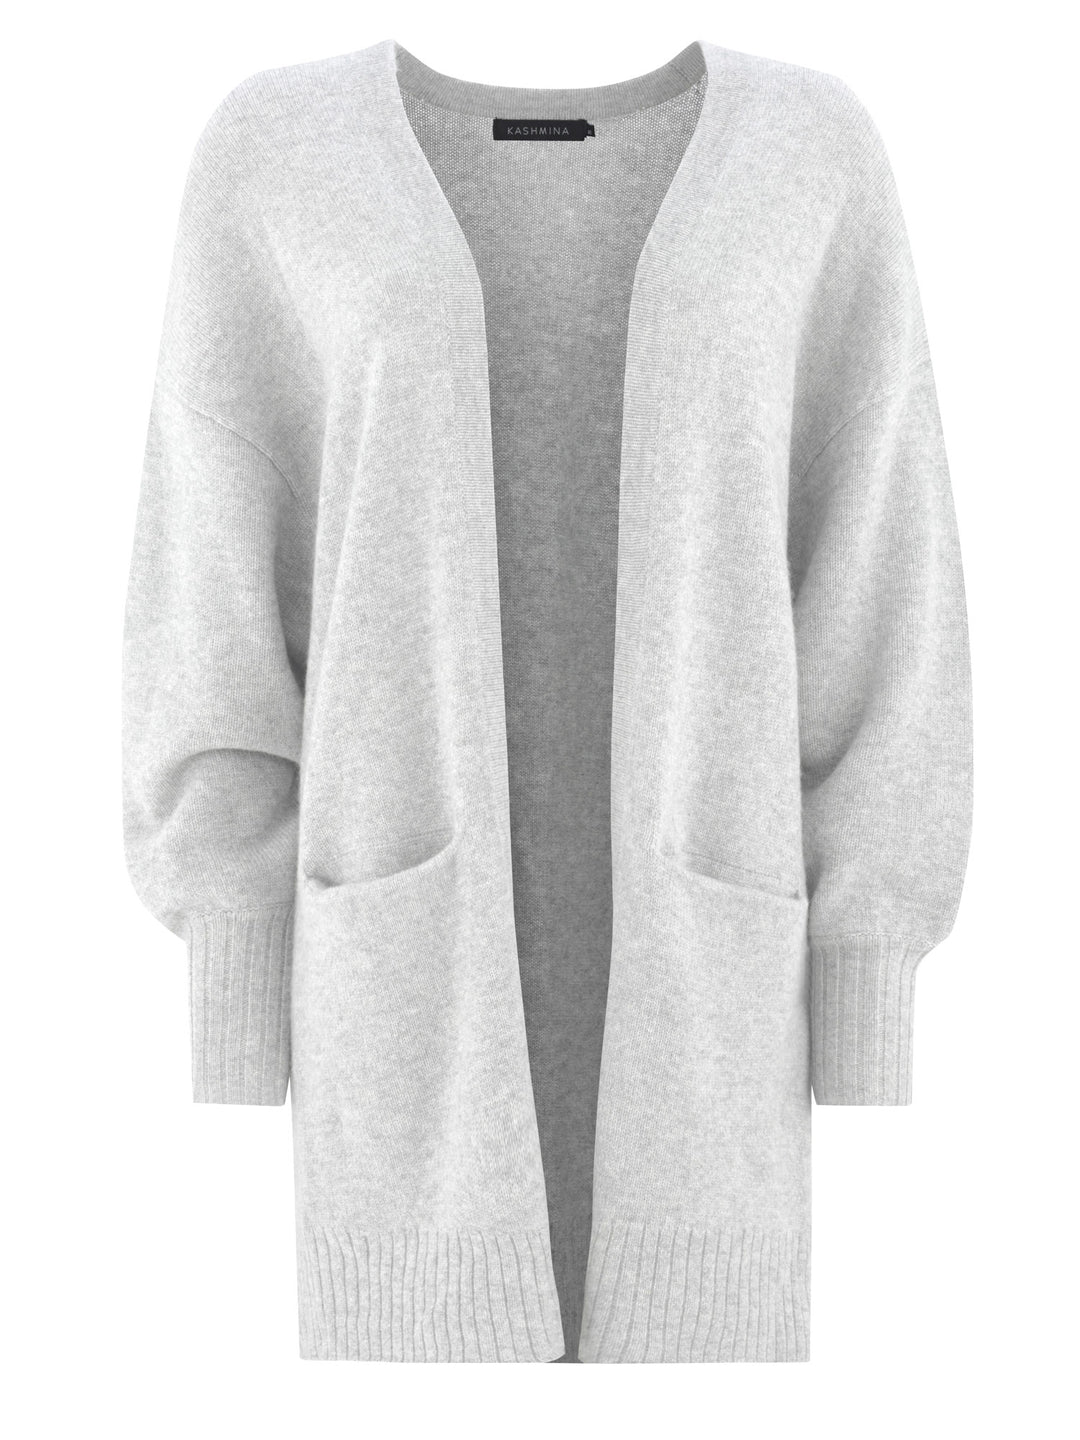 Cashmere cardigan in 100% cashmere by Kashmina